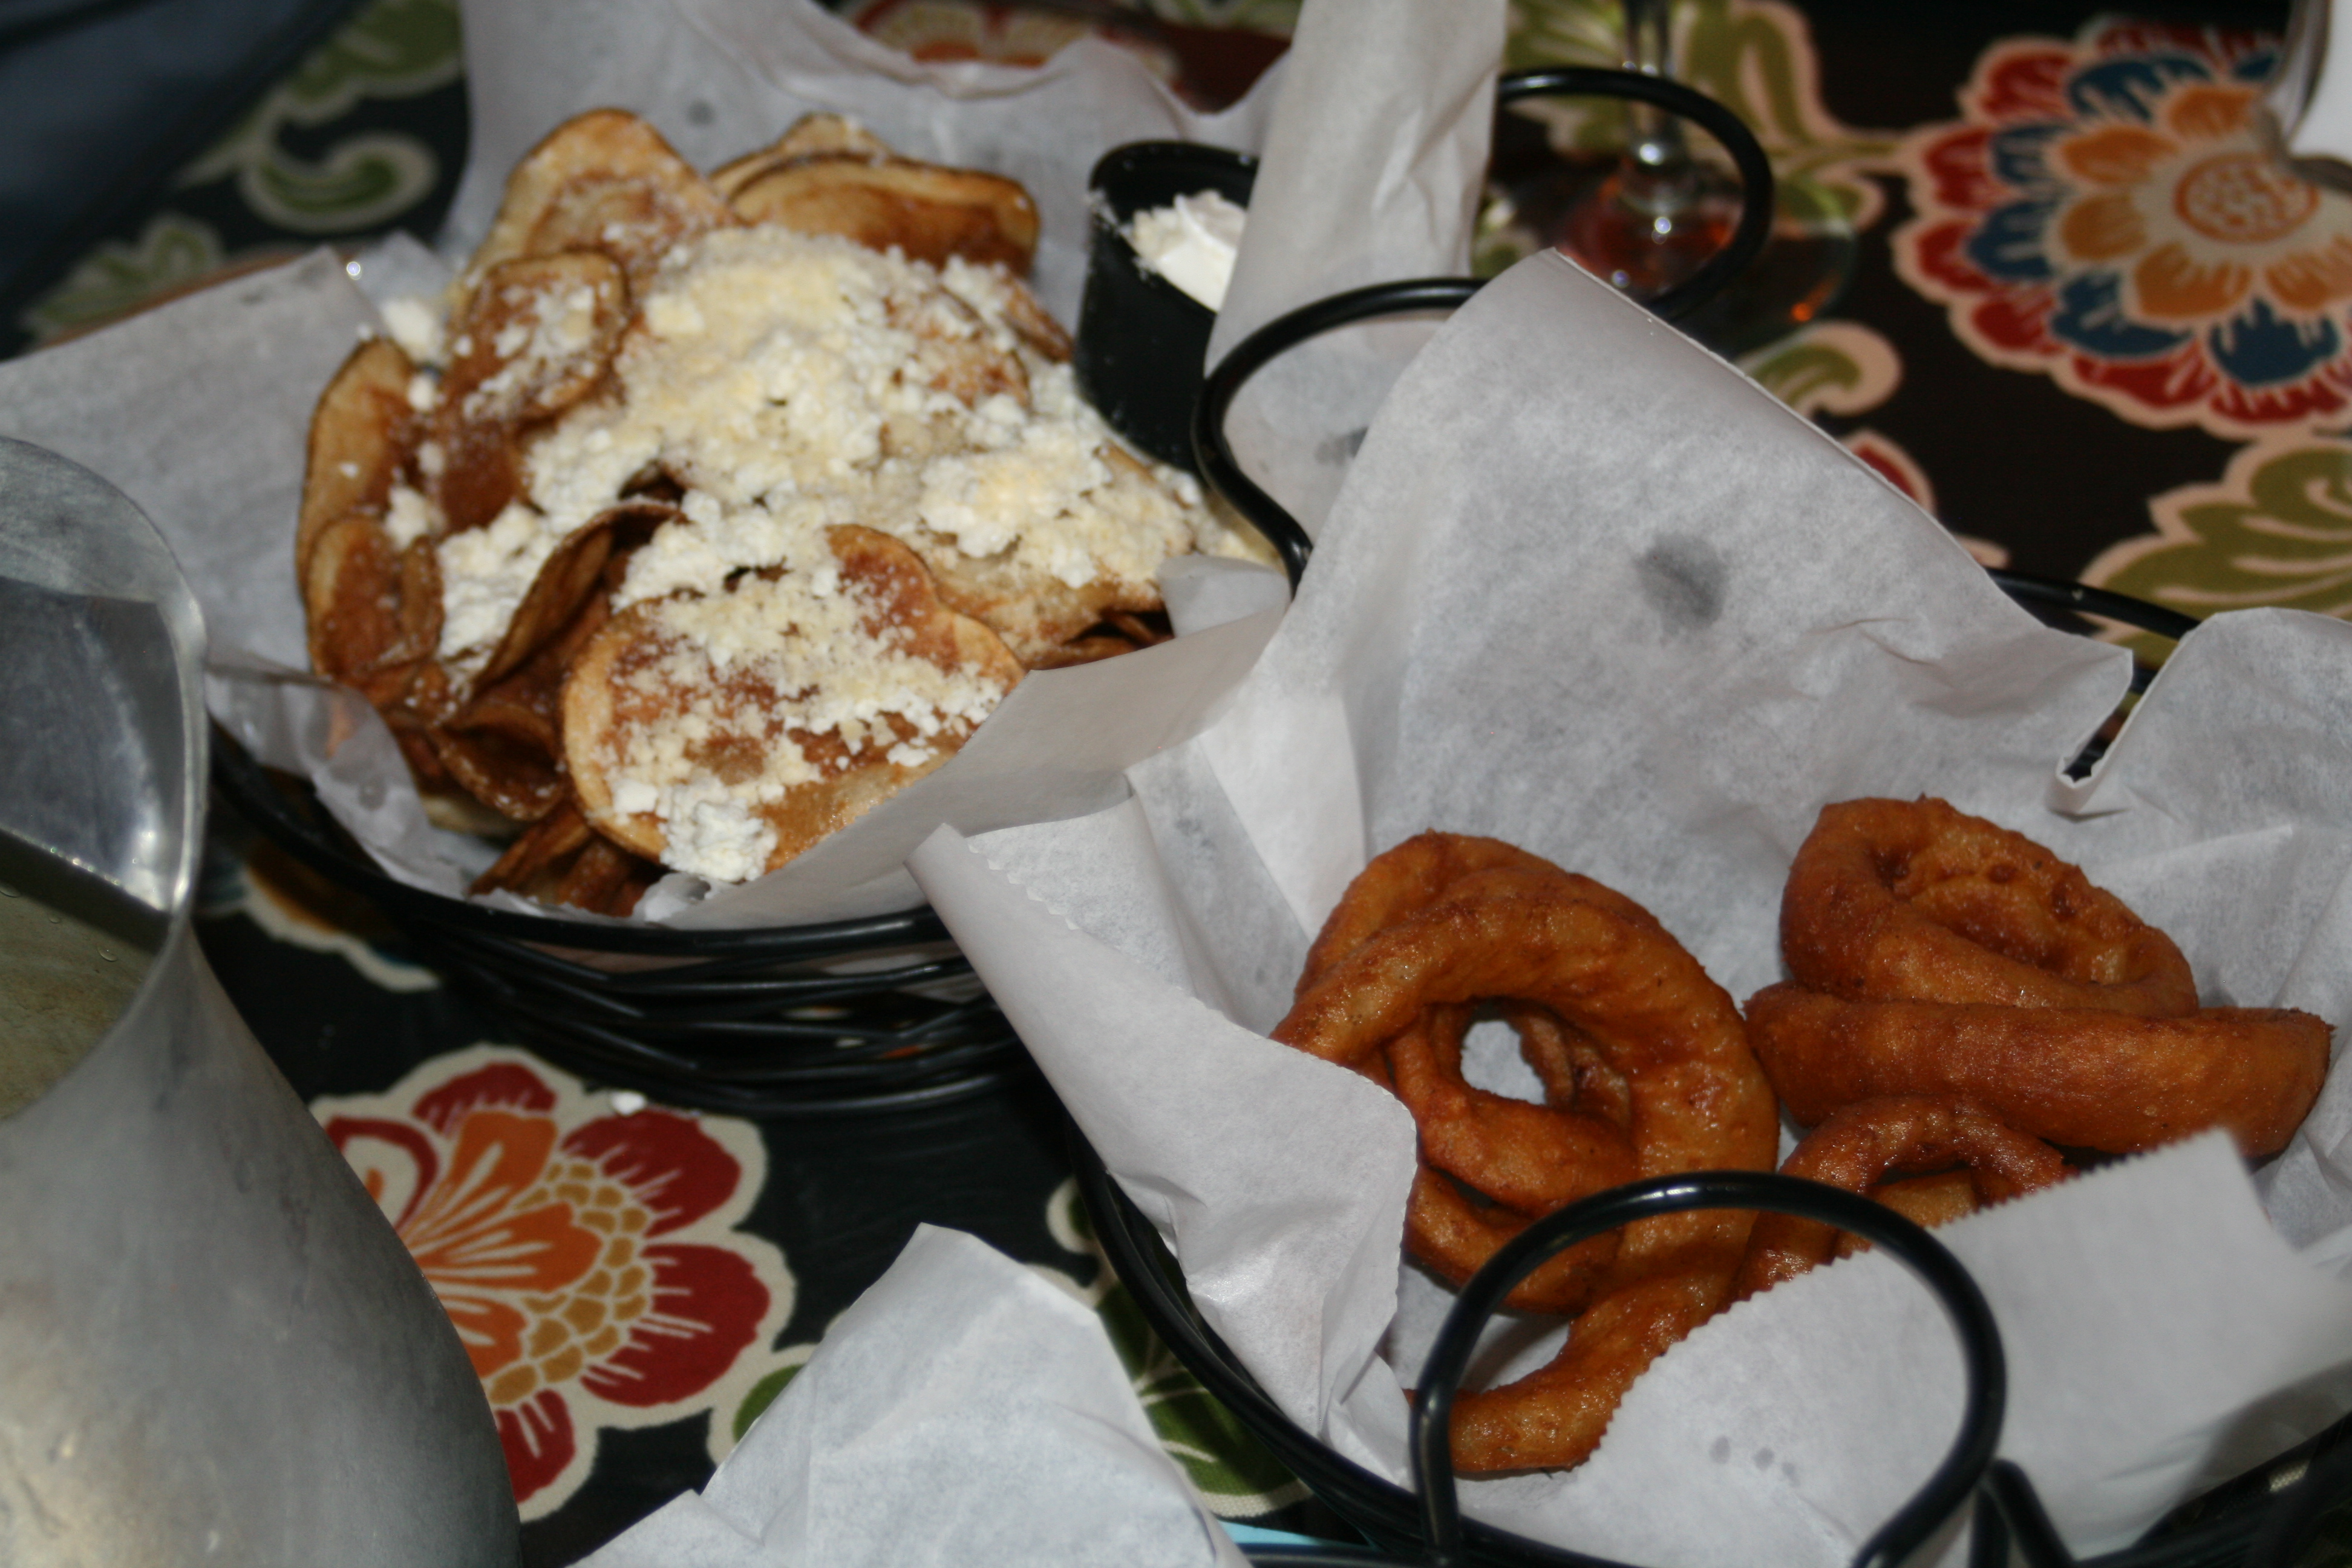 Chips and onion rings prepared in high oleic soybean oil at Greek Garden in Findlay, OH.